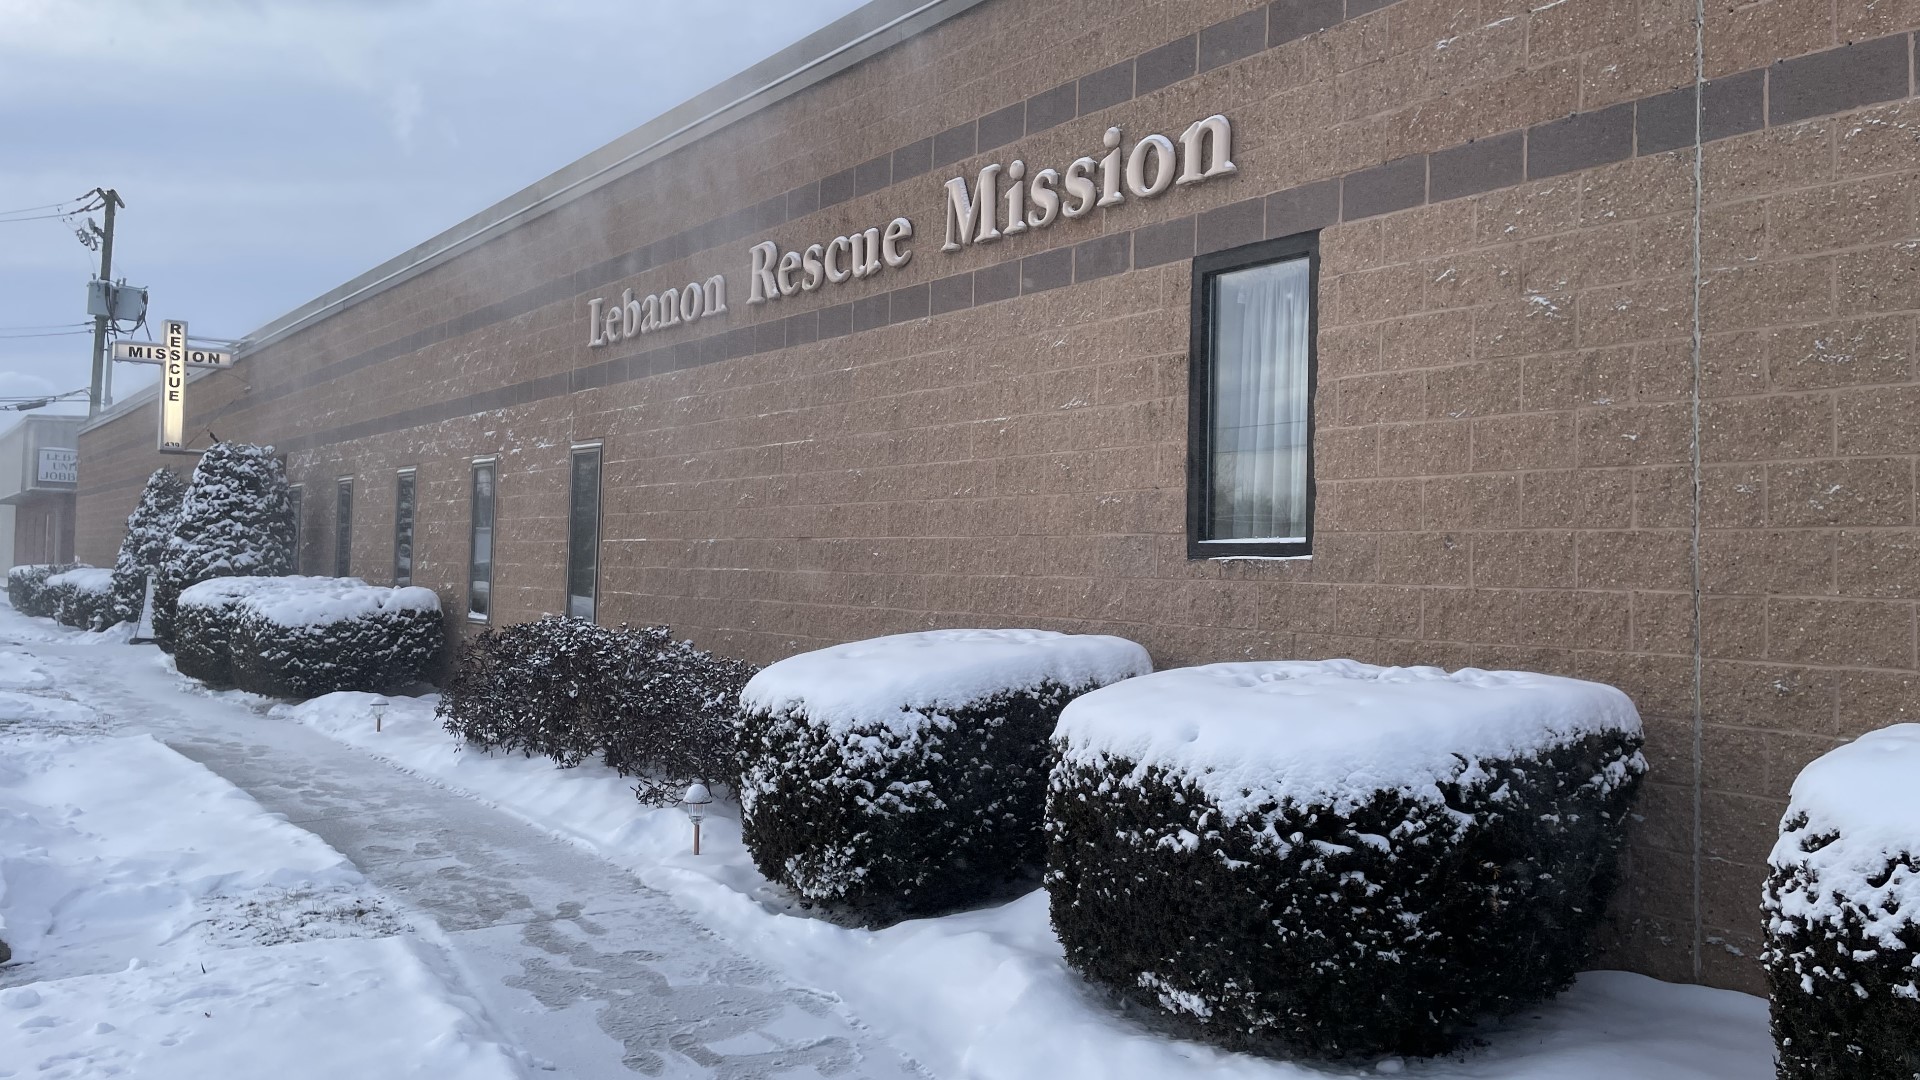 As wind chill temperatures drop below 20 degrees Fahrenheit, homeless shelters in Lebanon County are giving people in need a warm place to sleep.